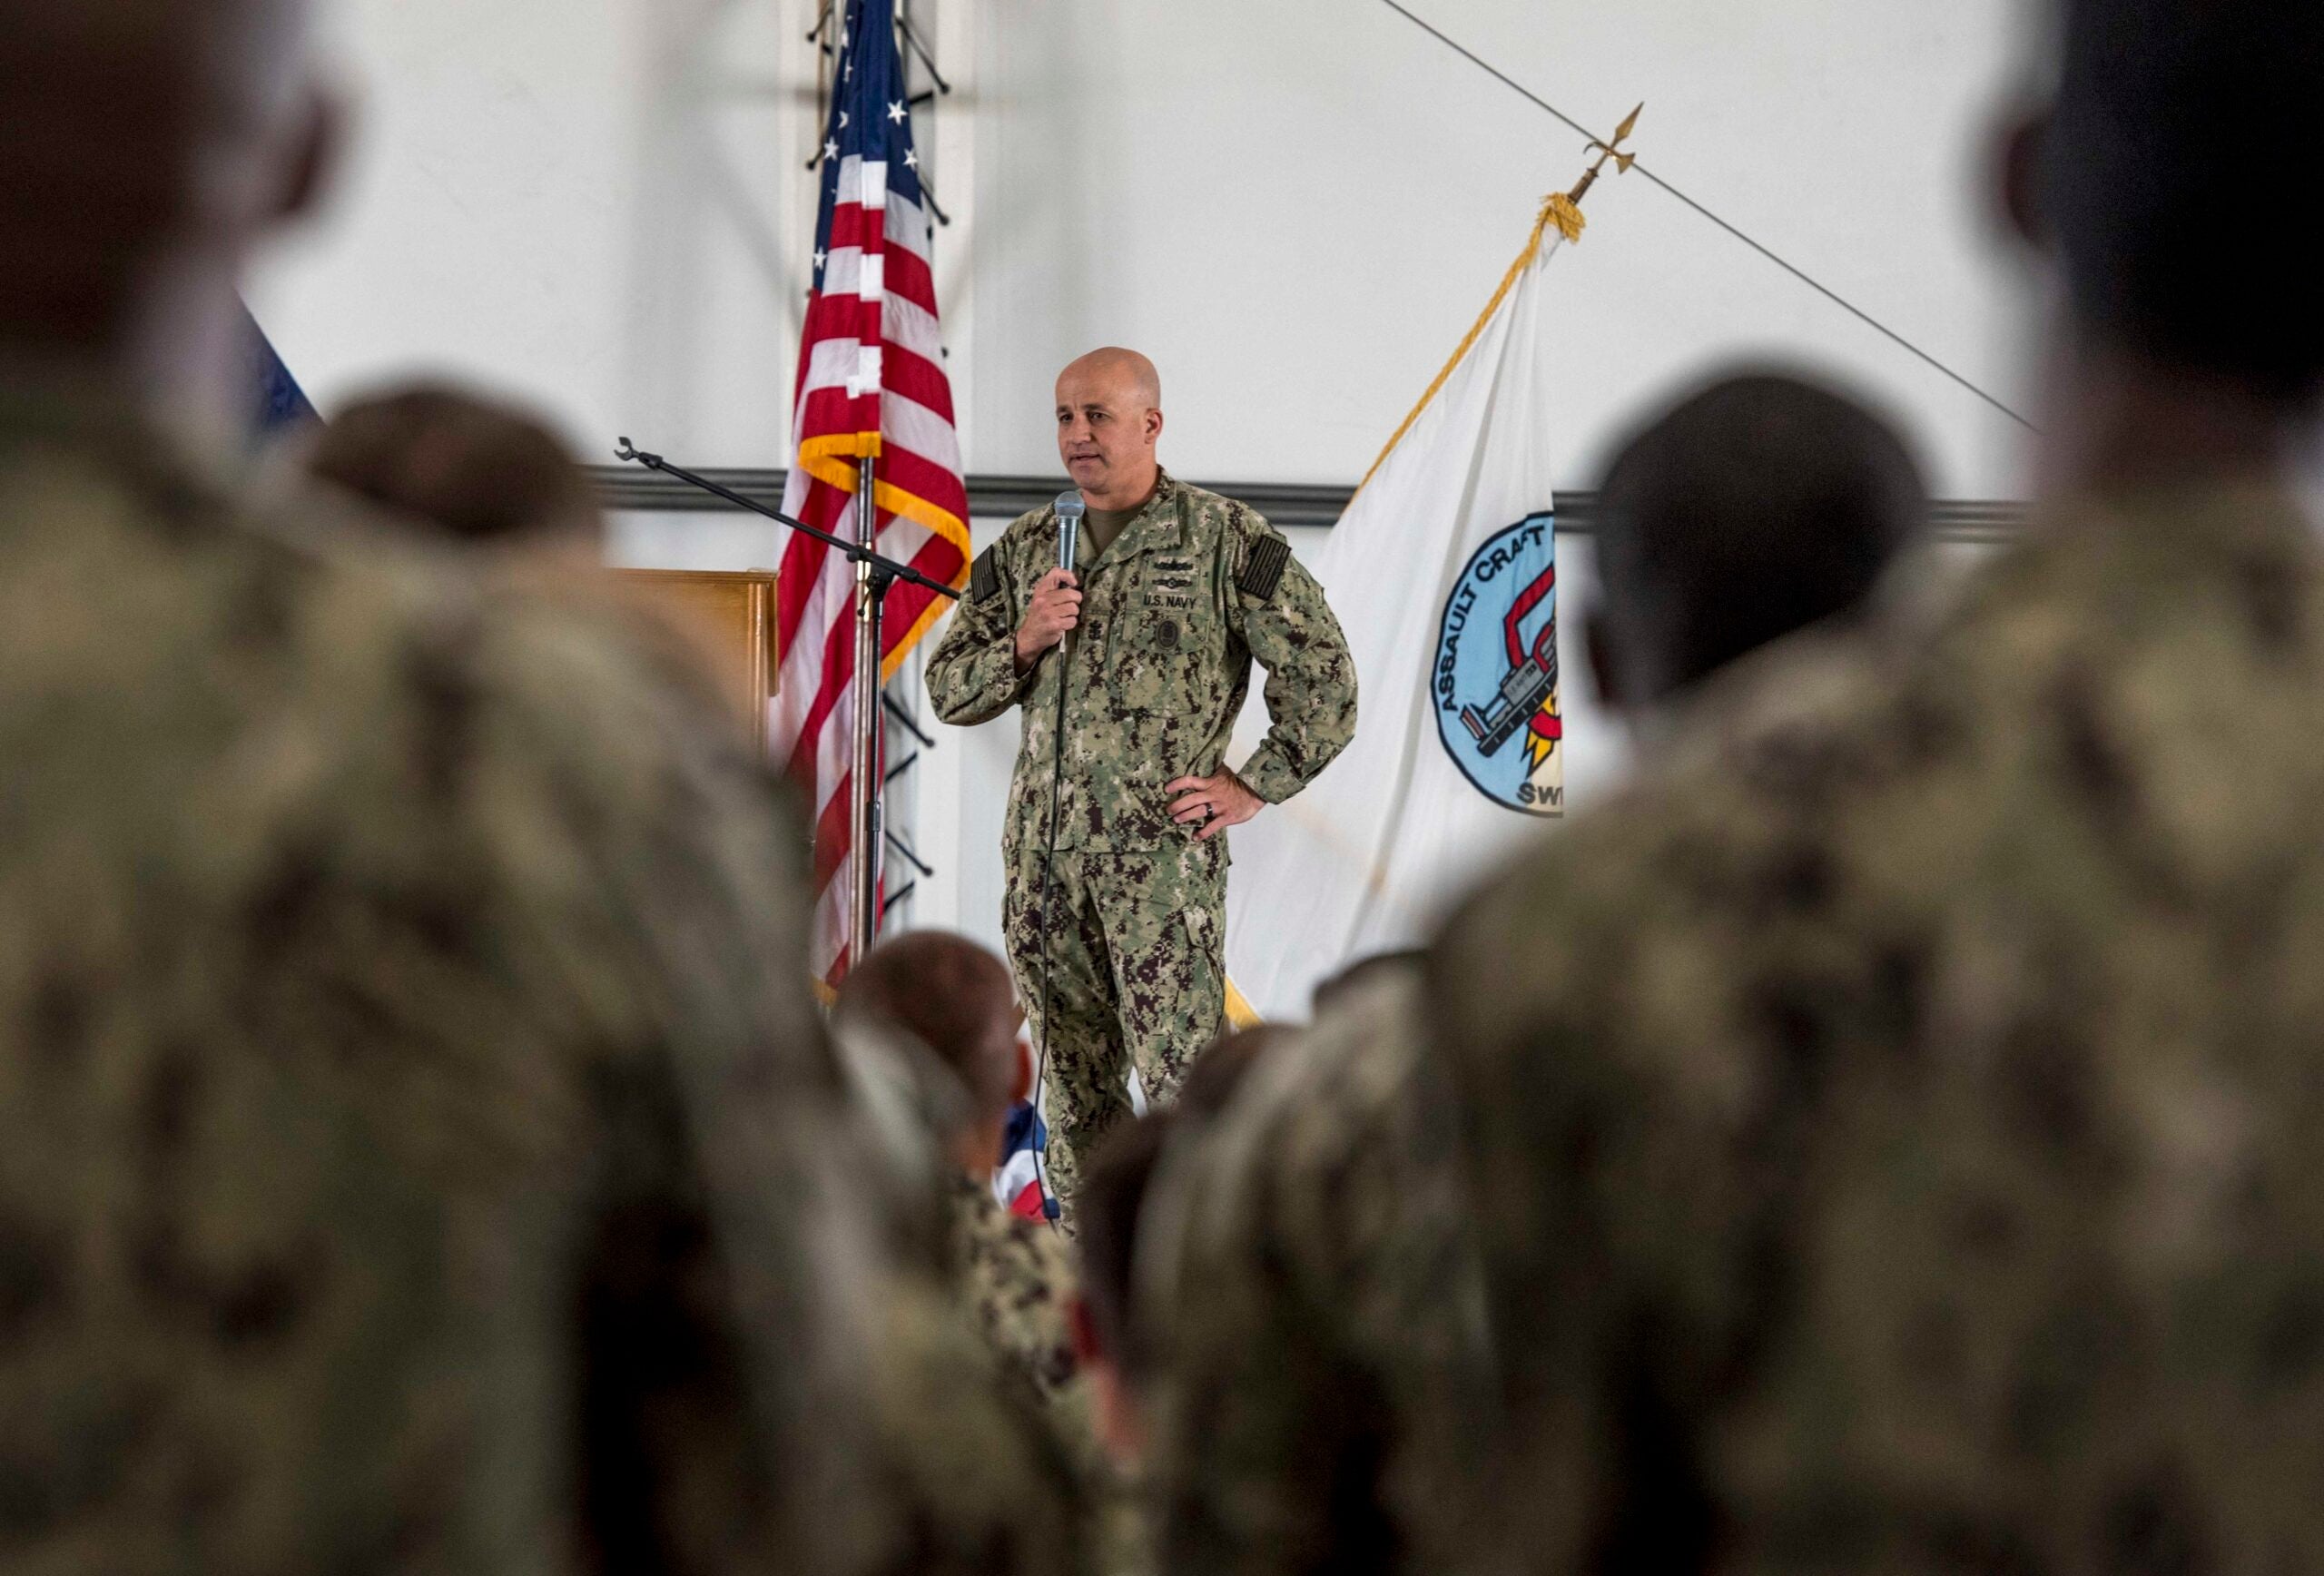 190712-N-UV609-0235 CAMP PENDELTON, Calif (July 12, 2019) Master Chief Petty Officer of the Navy Russell Smith  speaks to Sailors assigned to Assault Craft Unit 5 (ACU 5) during an all hands call July 12. During the visit, Smith highlighted the importance of readiness across the Blue-Green team, and the value of amphibious capabilities. (U.S. Navy photo by Mass Communication Specialist 2nd Class David Mora Jr.)